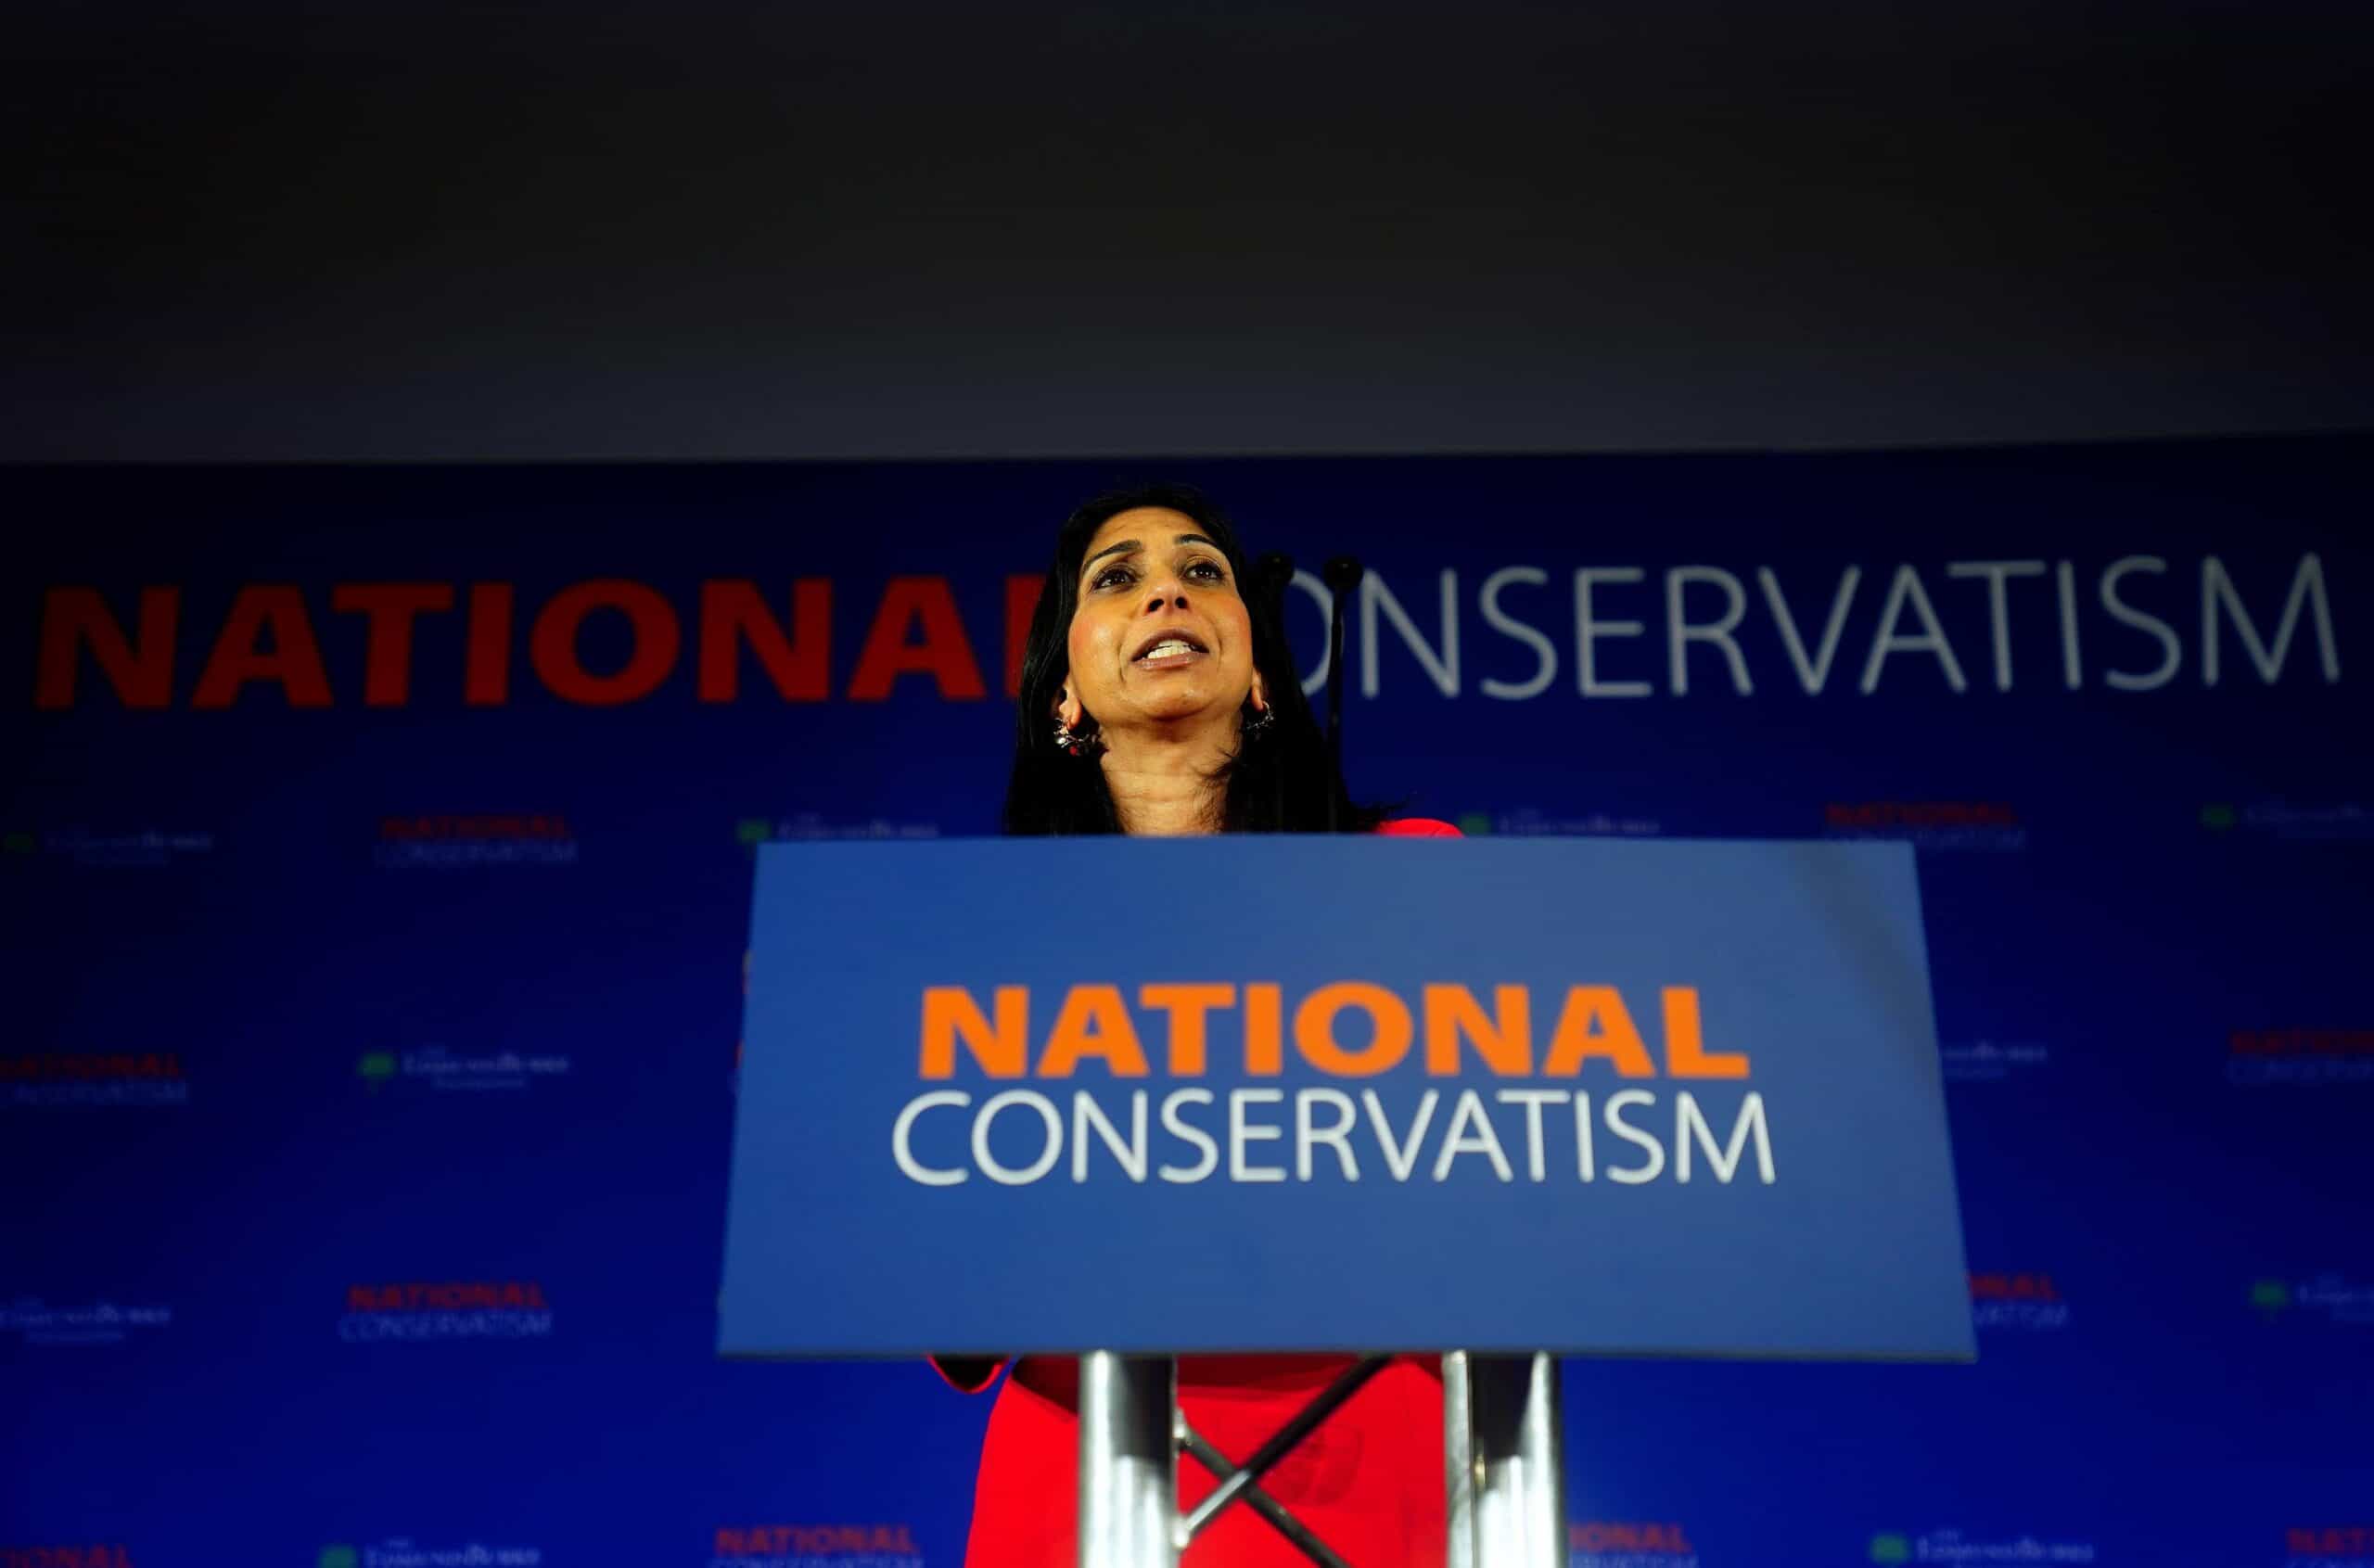 Left-leaning media barred from National Conservatism Conference